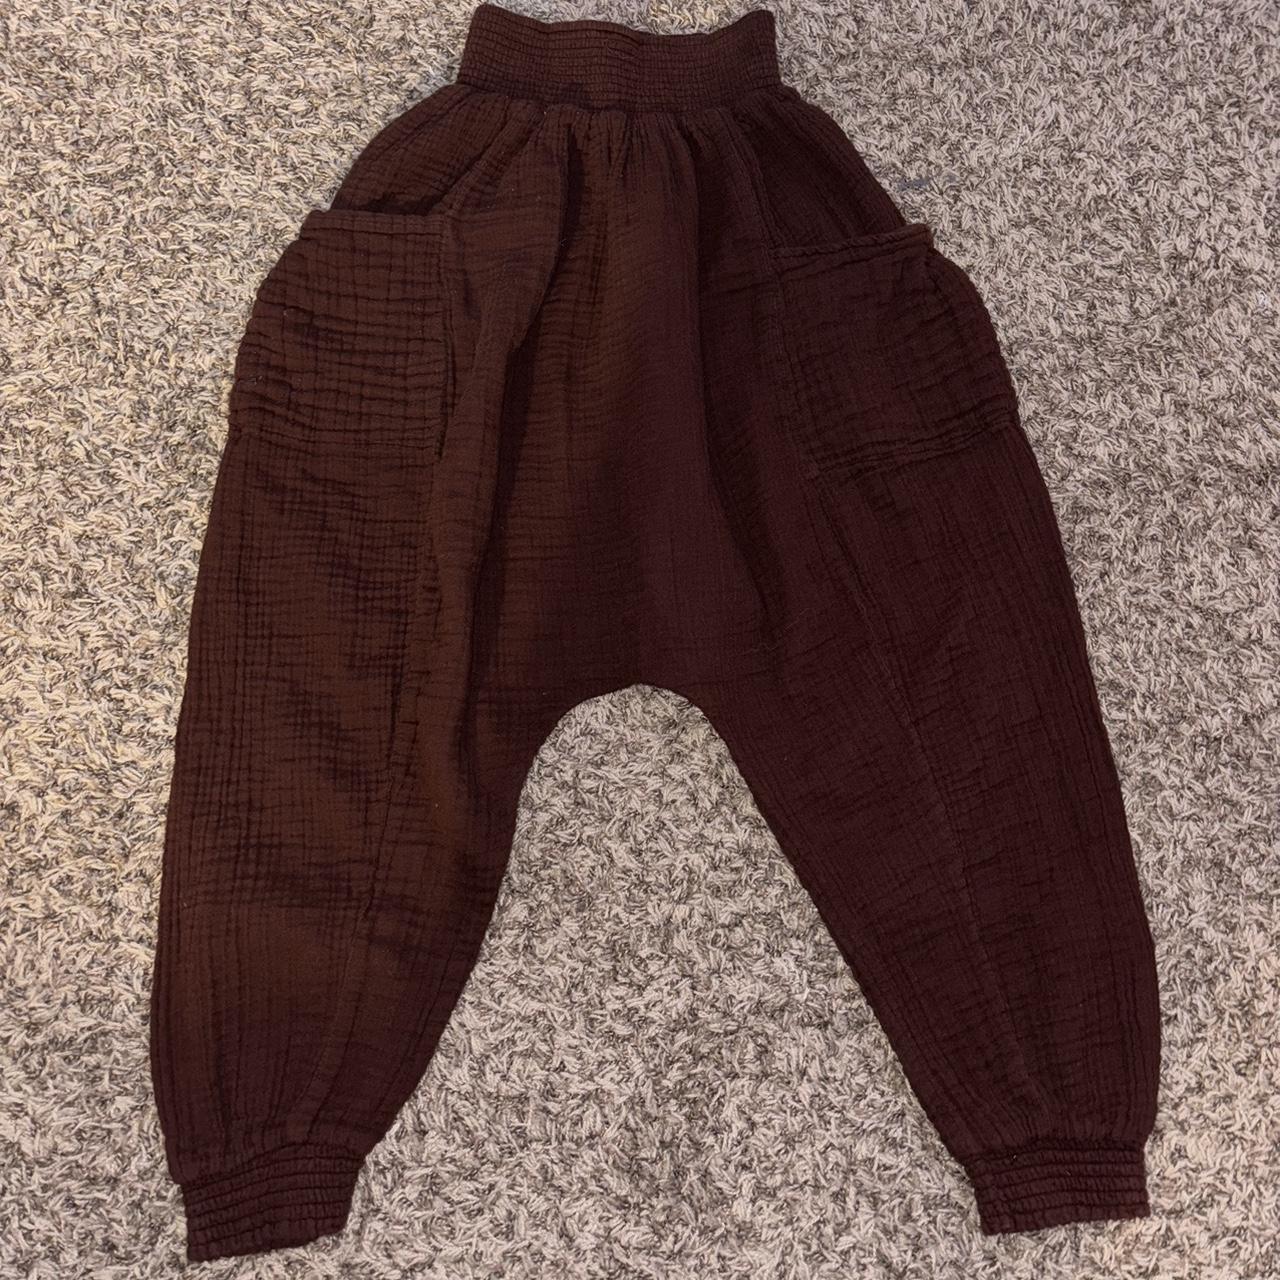 Free People Women's Brown and Burgundy Trousers